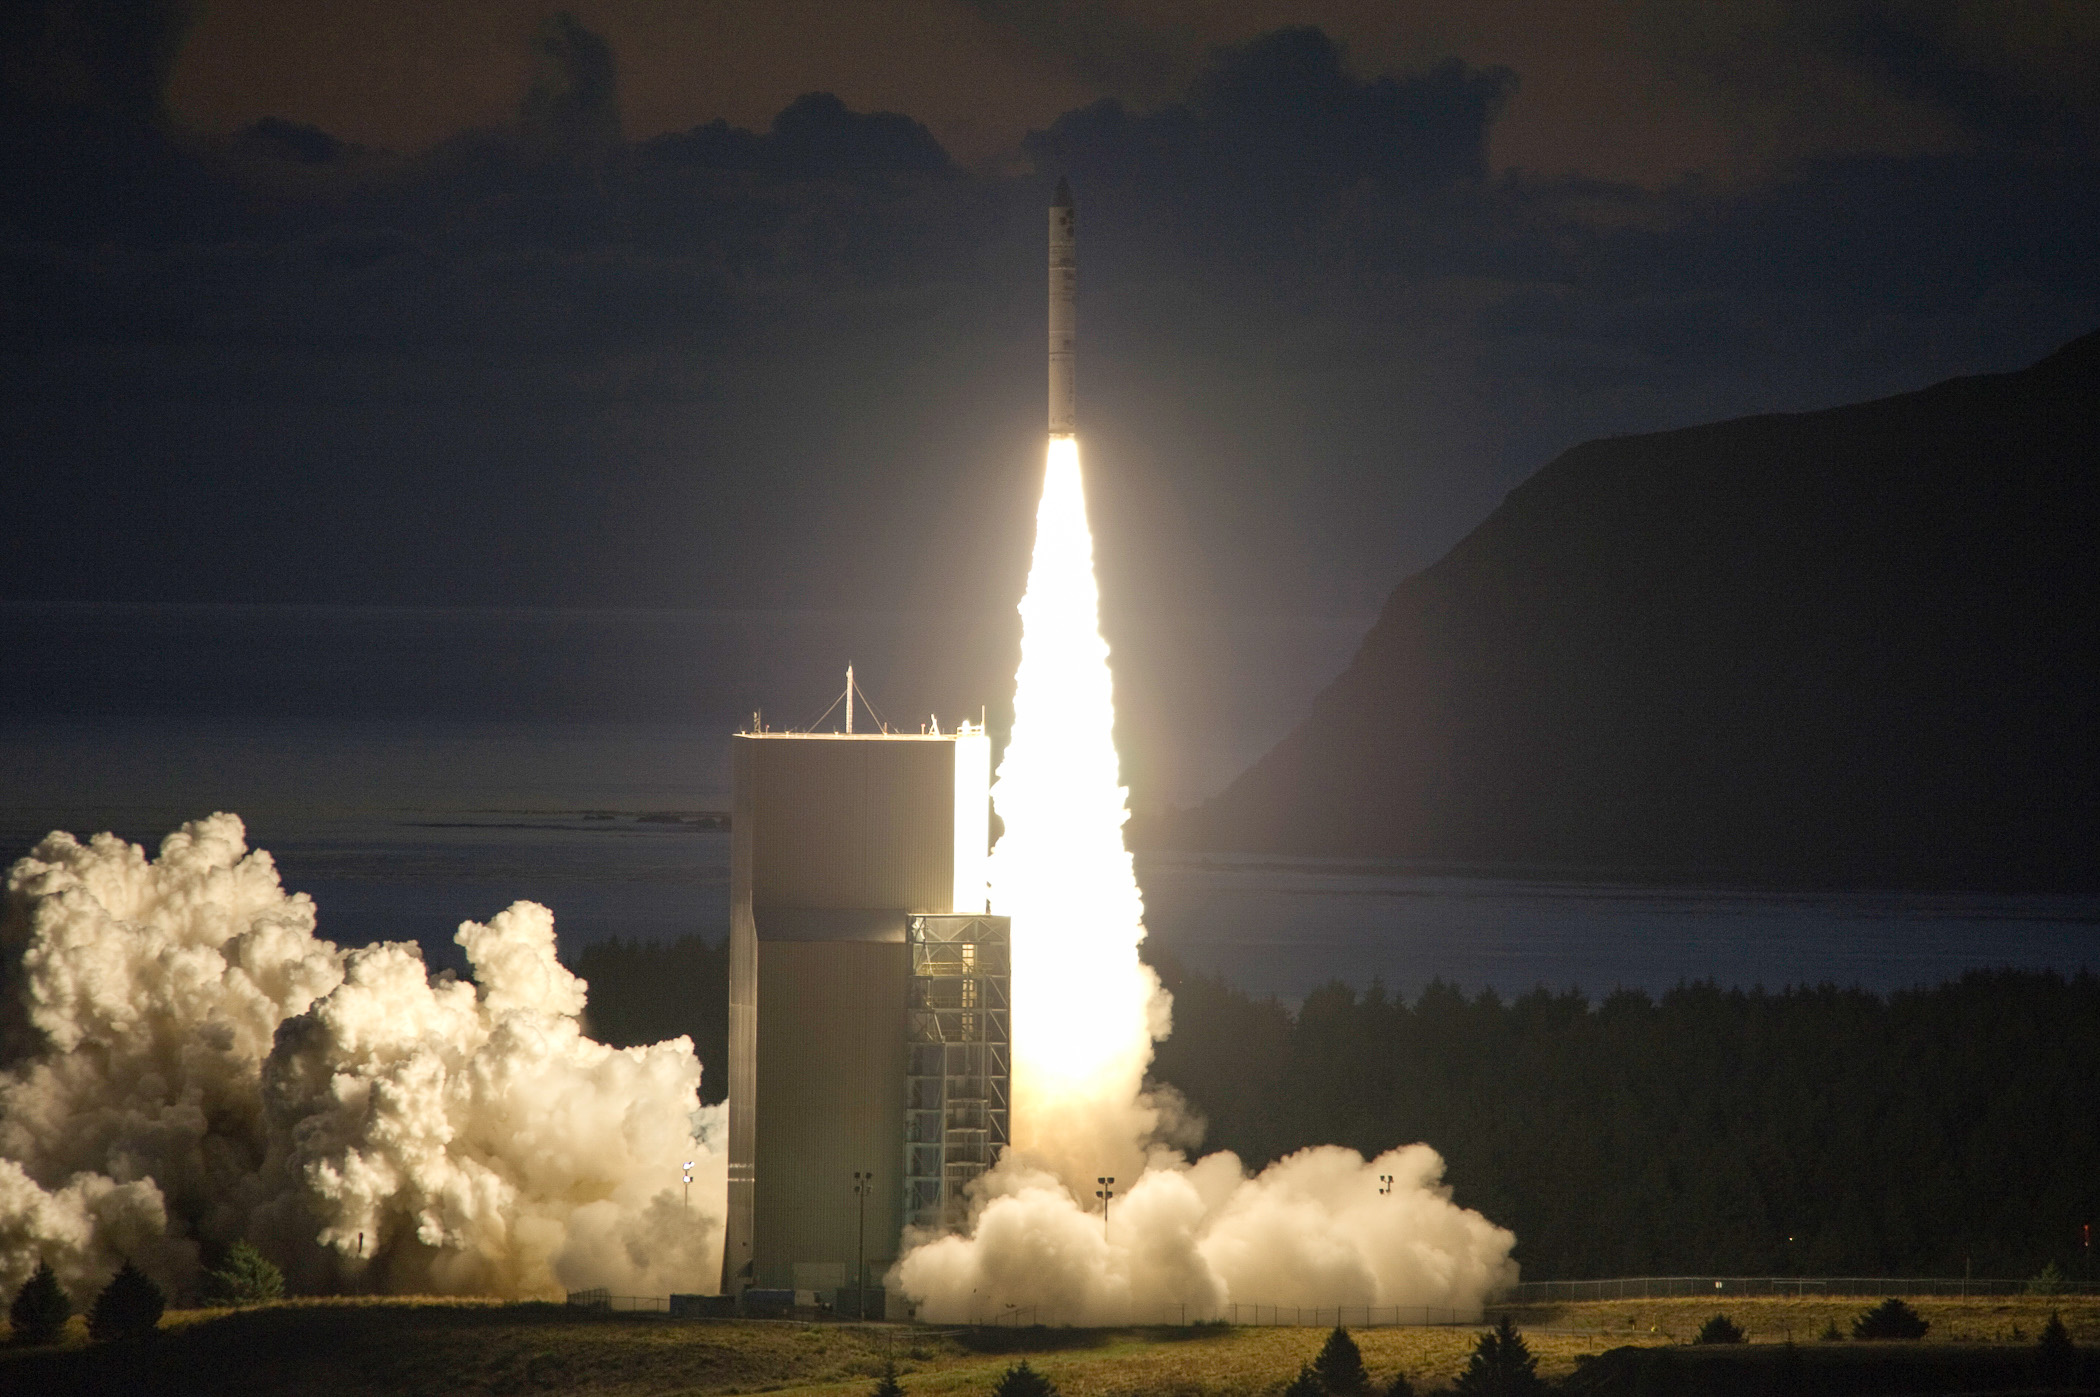    KODIAK, Alaska  - The Office of Naval Research-sponsored tactical satellite IV (TacSat-4) lifts-off from the Alaskan Aerospace Corporation's Kodiak Launch Complex aboard a Minotaur IV+ launch vehicle. Built by the Naval Research Laboratory and Joh